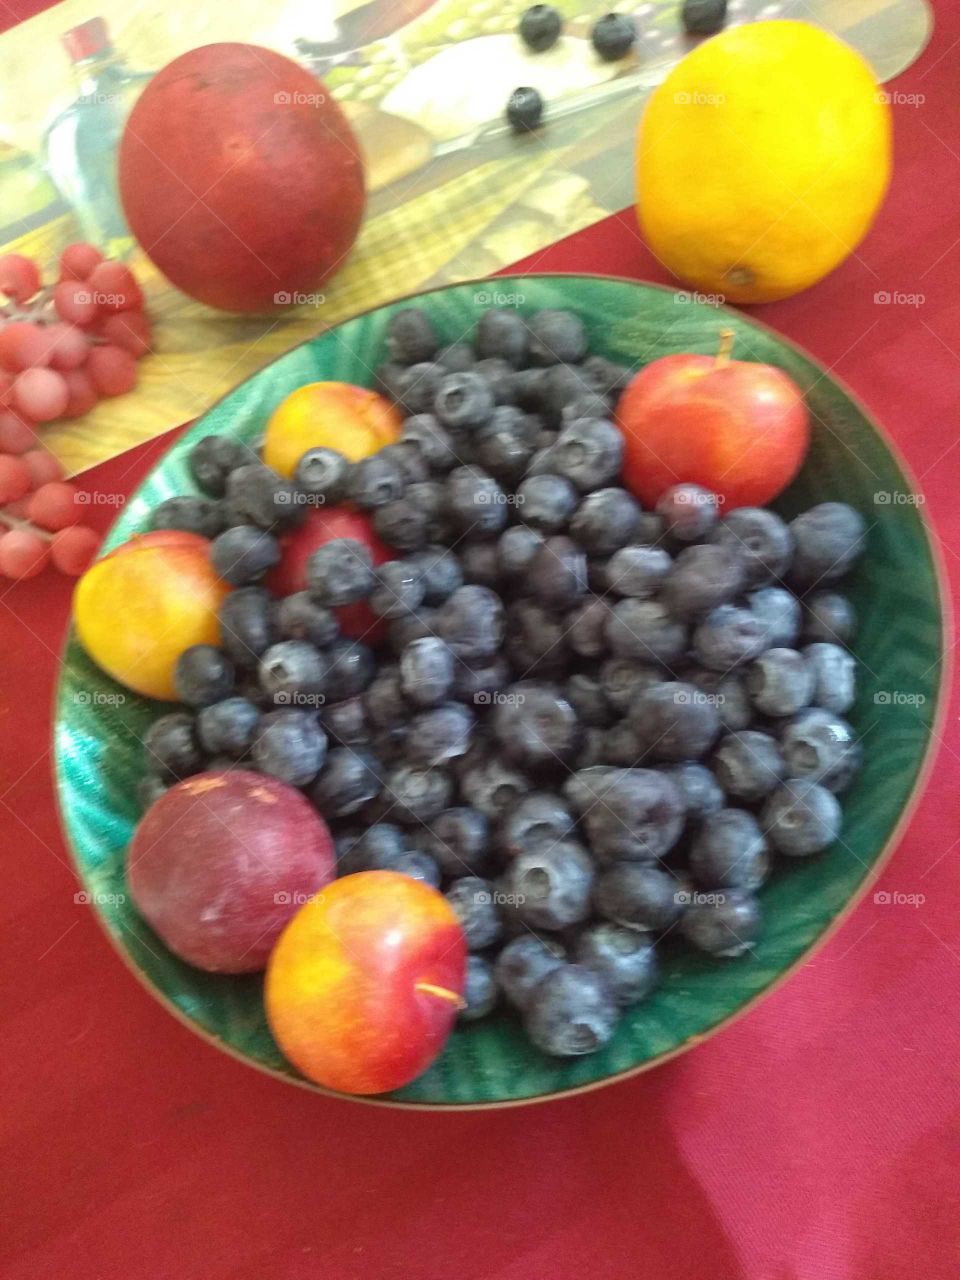 in this photo is blueberries baby peaches pomegranate and lemon